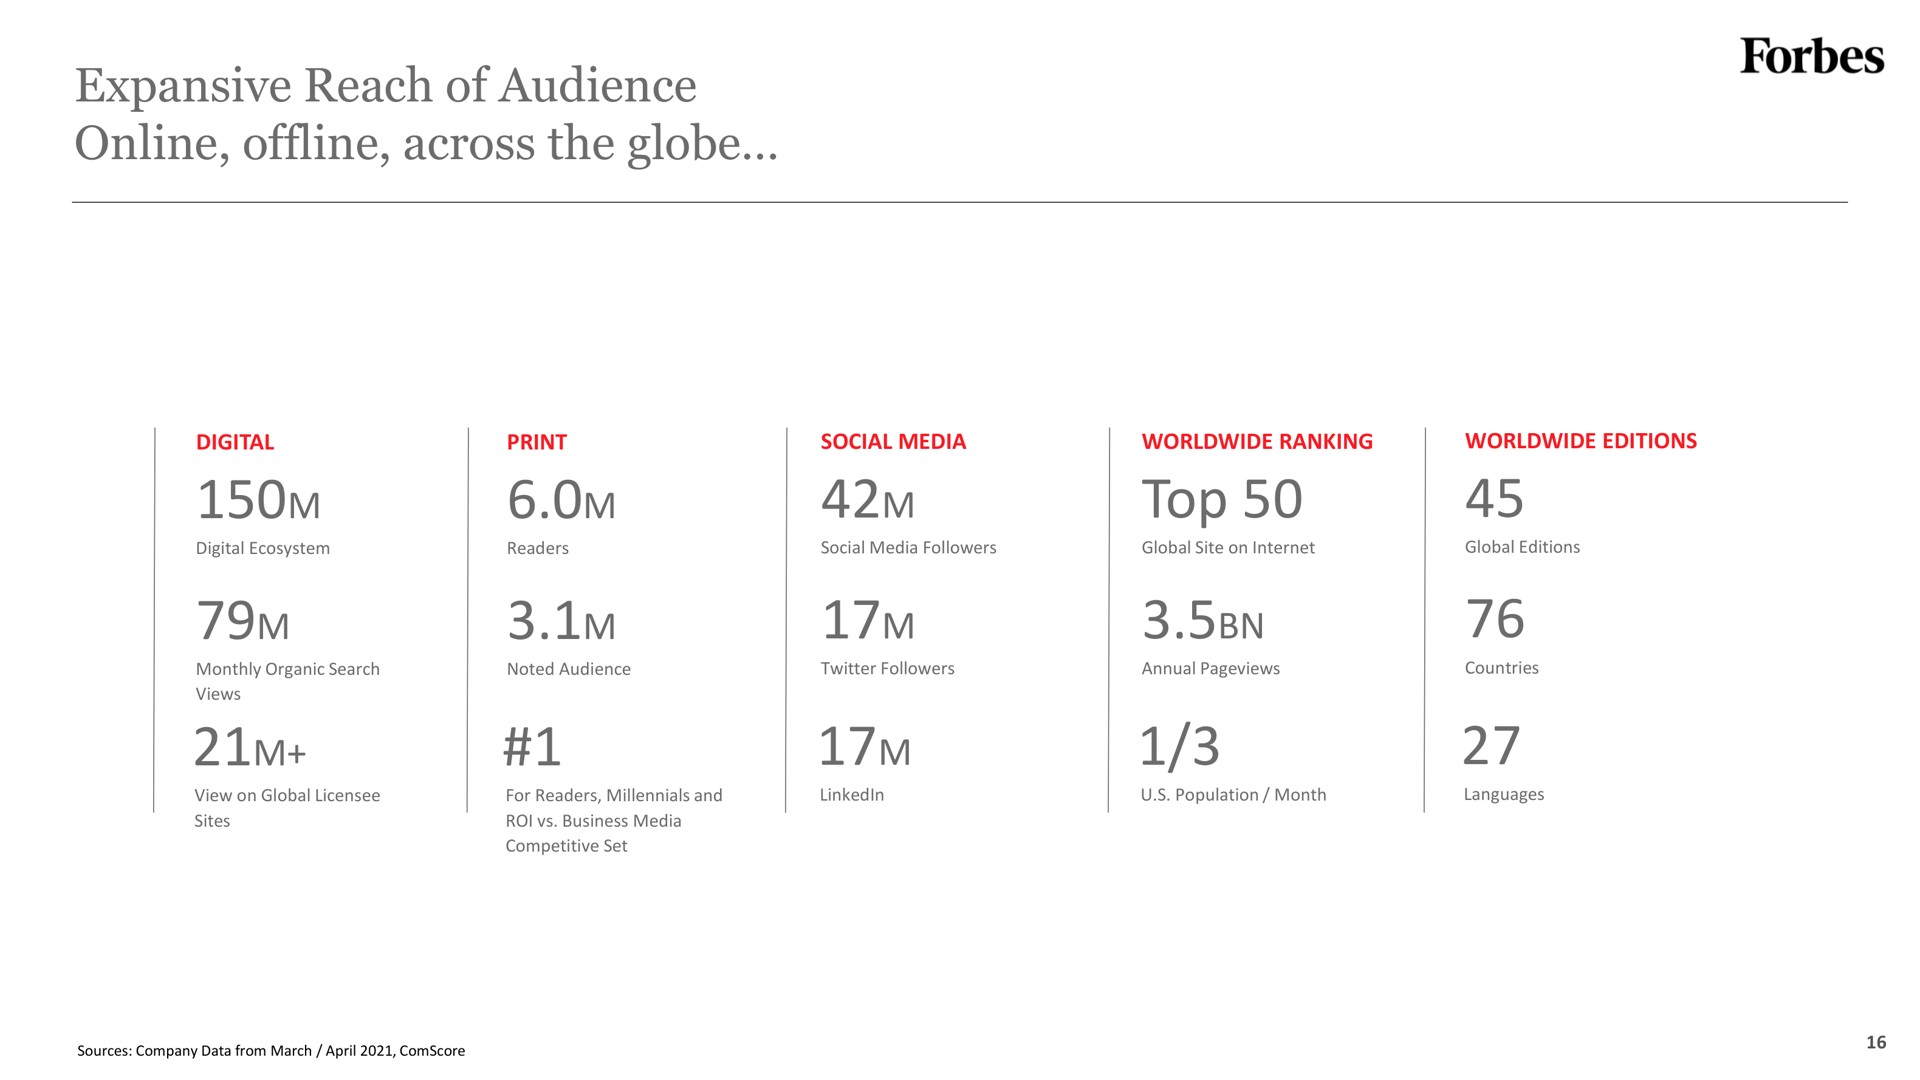 expansive reach of audience across the globe top | Forbes